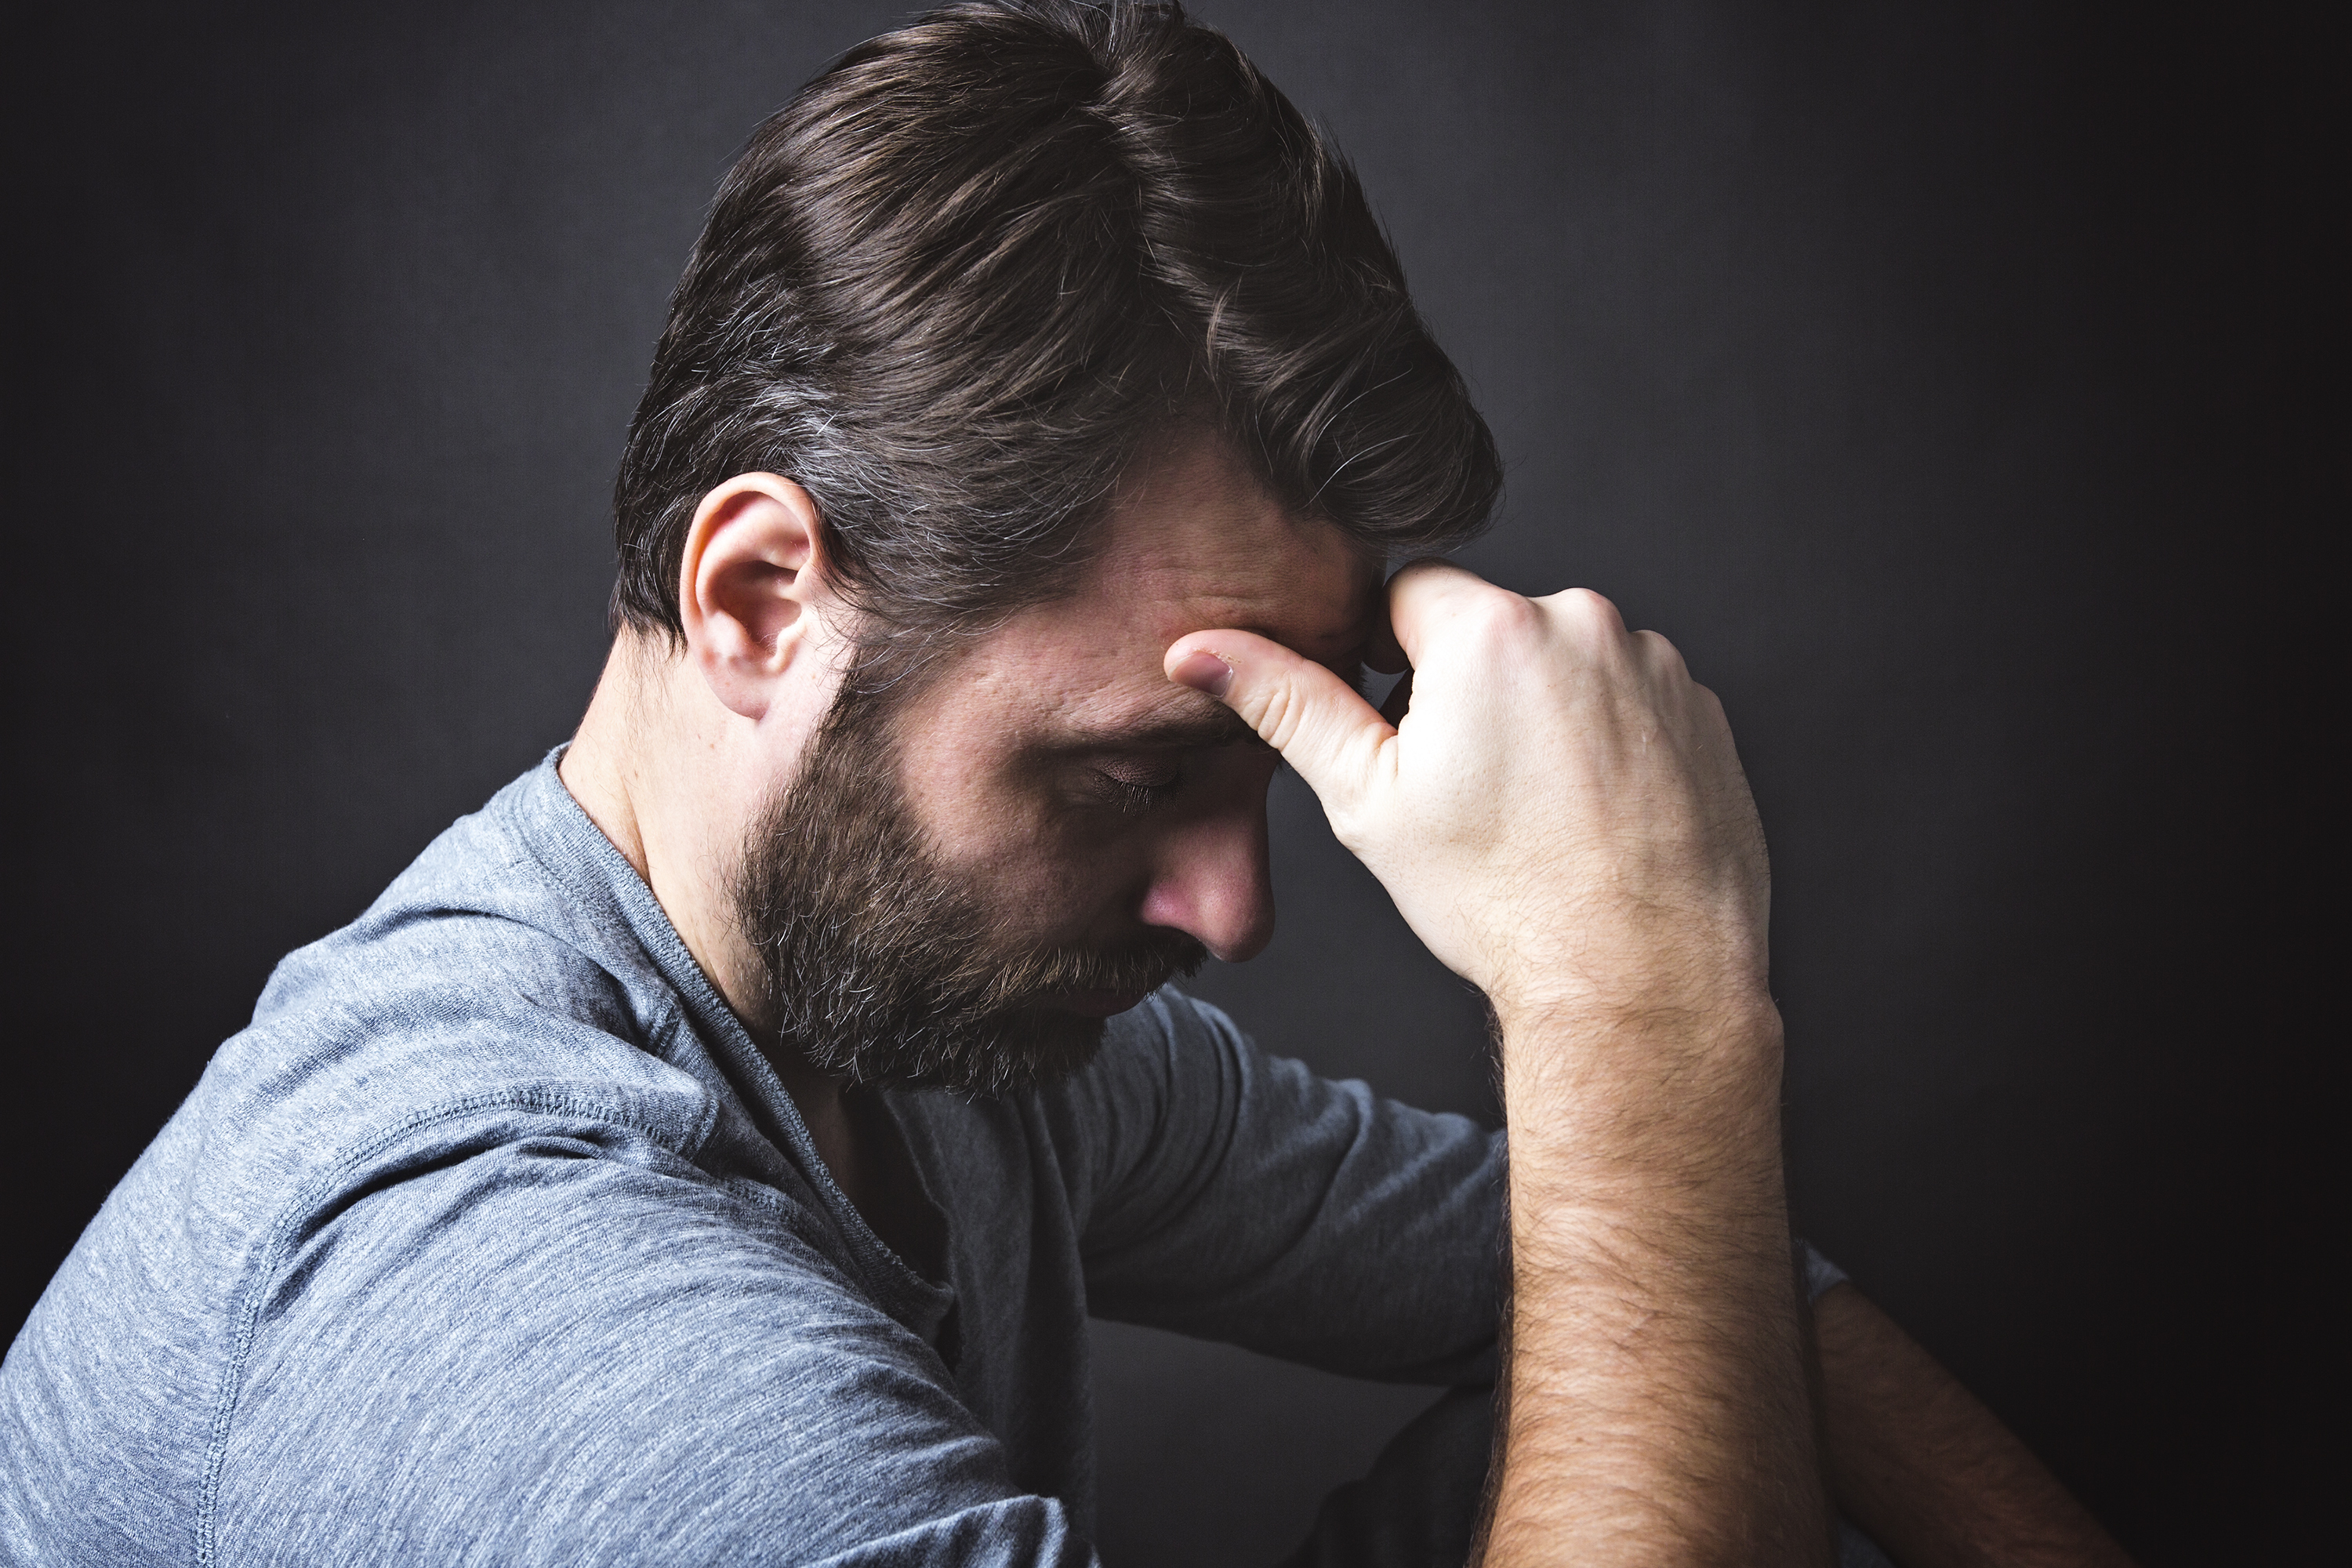 A depressed man with his hand on his forehead | Source: Shutterstock